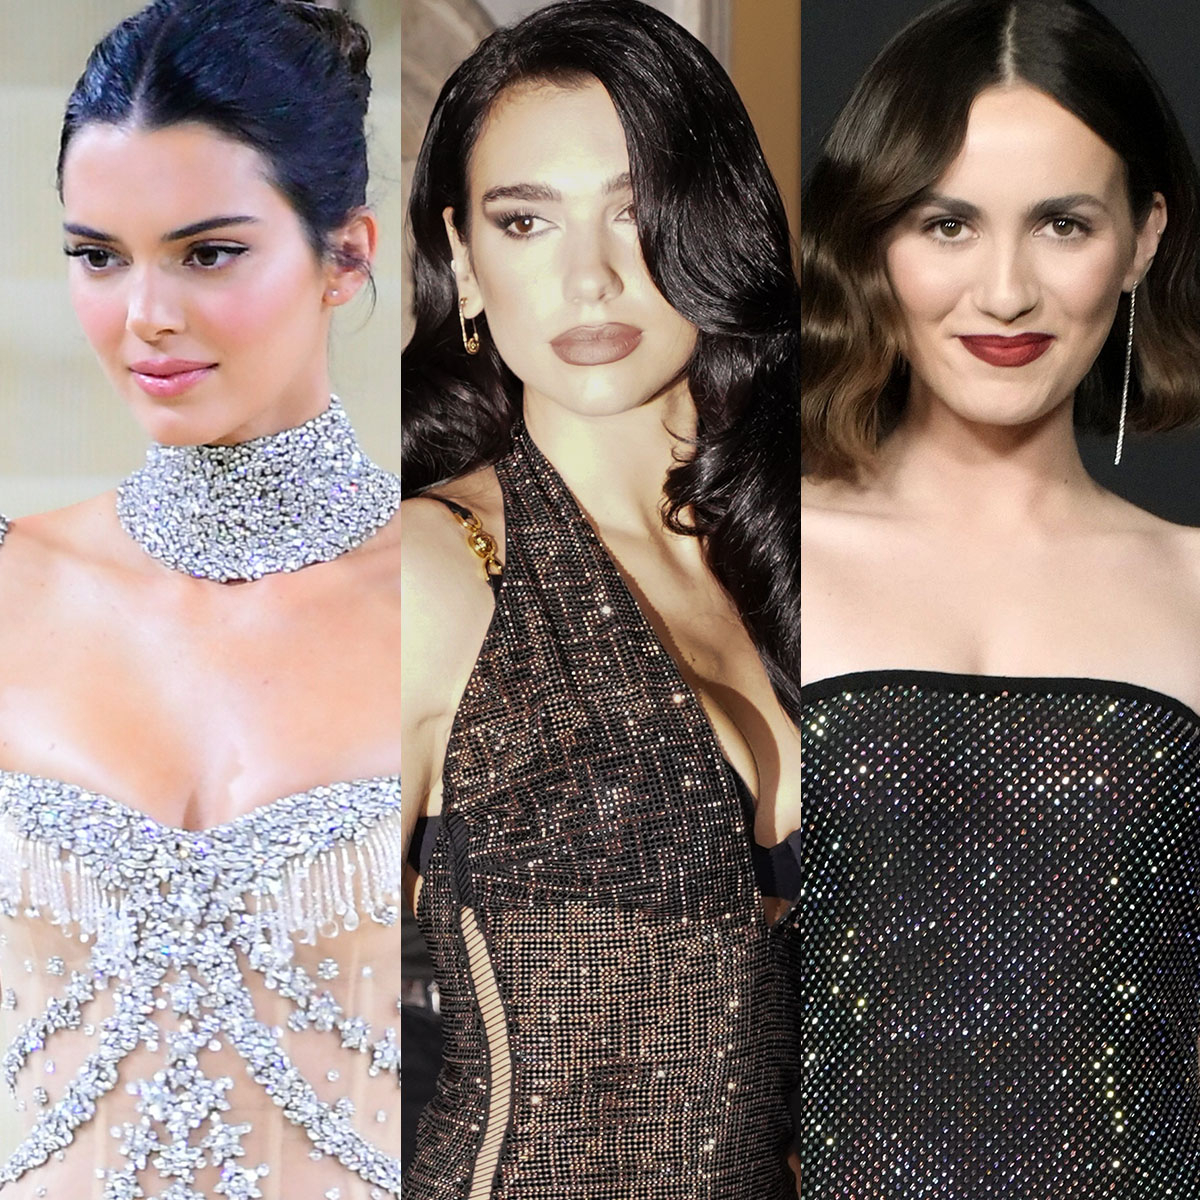 Bare It All With the Celeb-Approved Sheer Clothing Trend